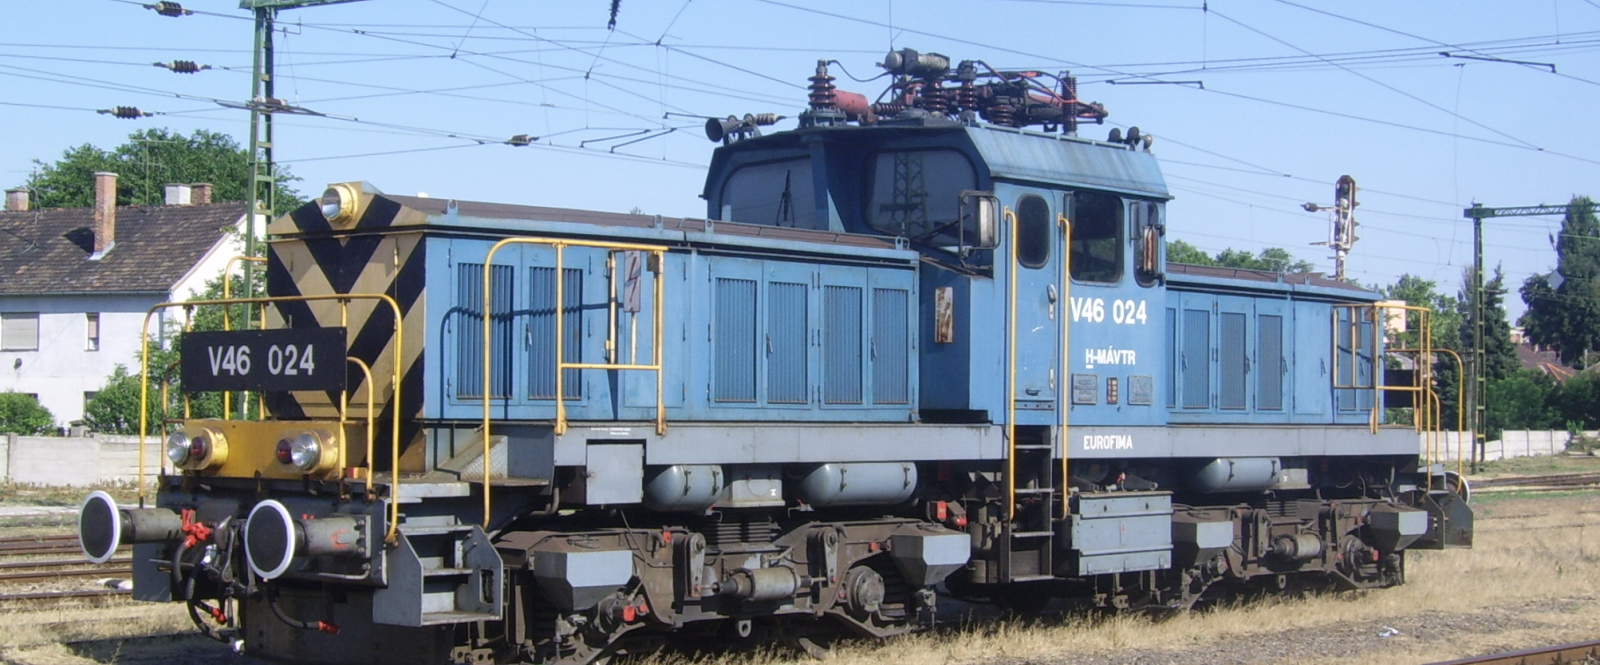 V46 123 in August 2009 in Kecskemét